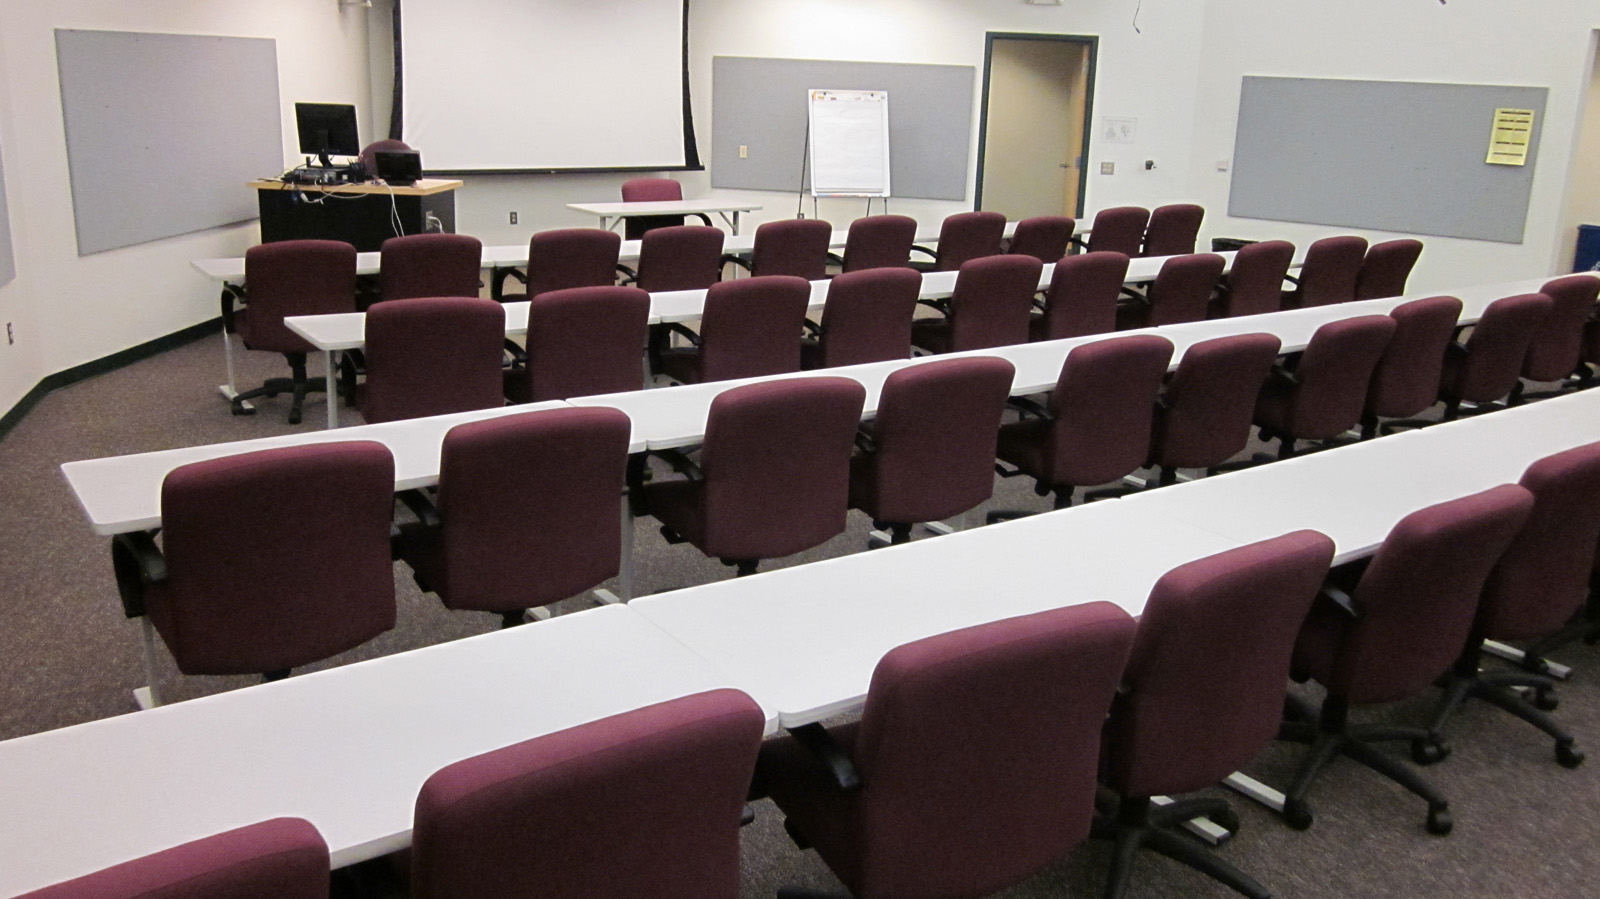 A1025 Meeting Room at the Groves